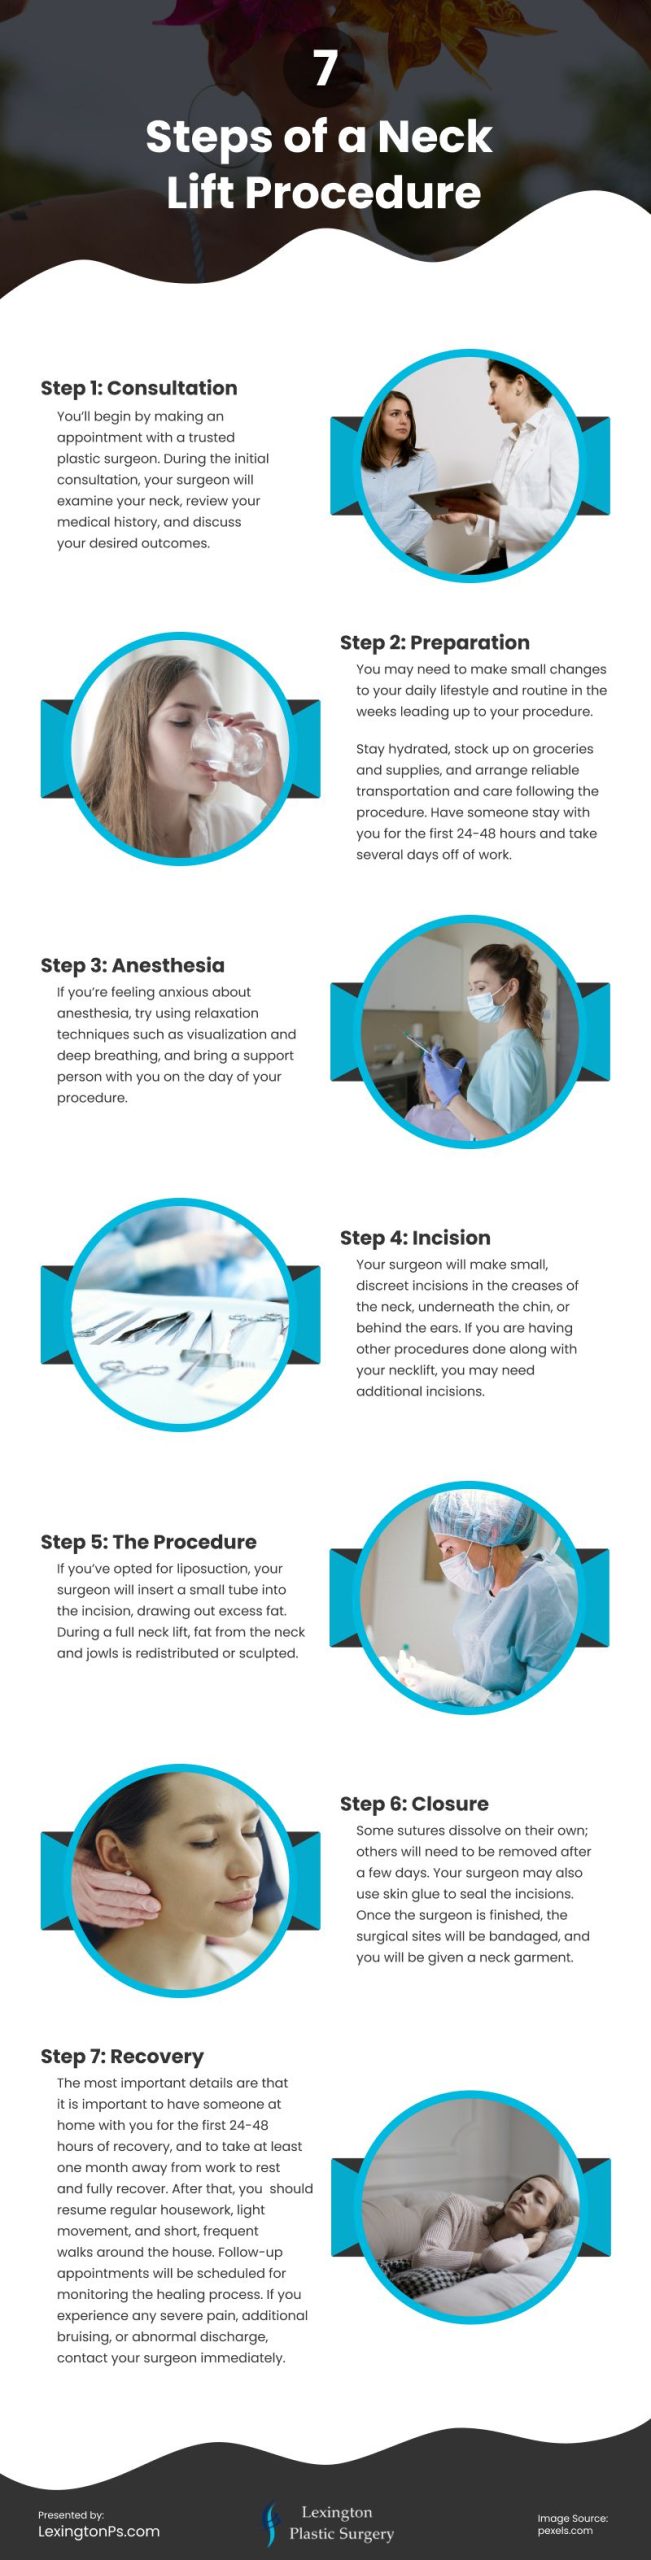 7 Steps of a Neck Lift Procedure Infographic